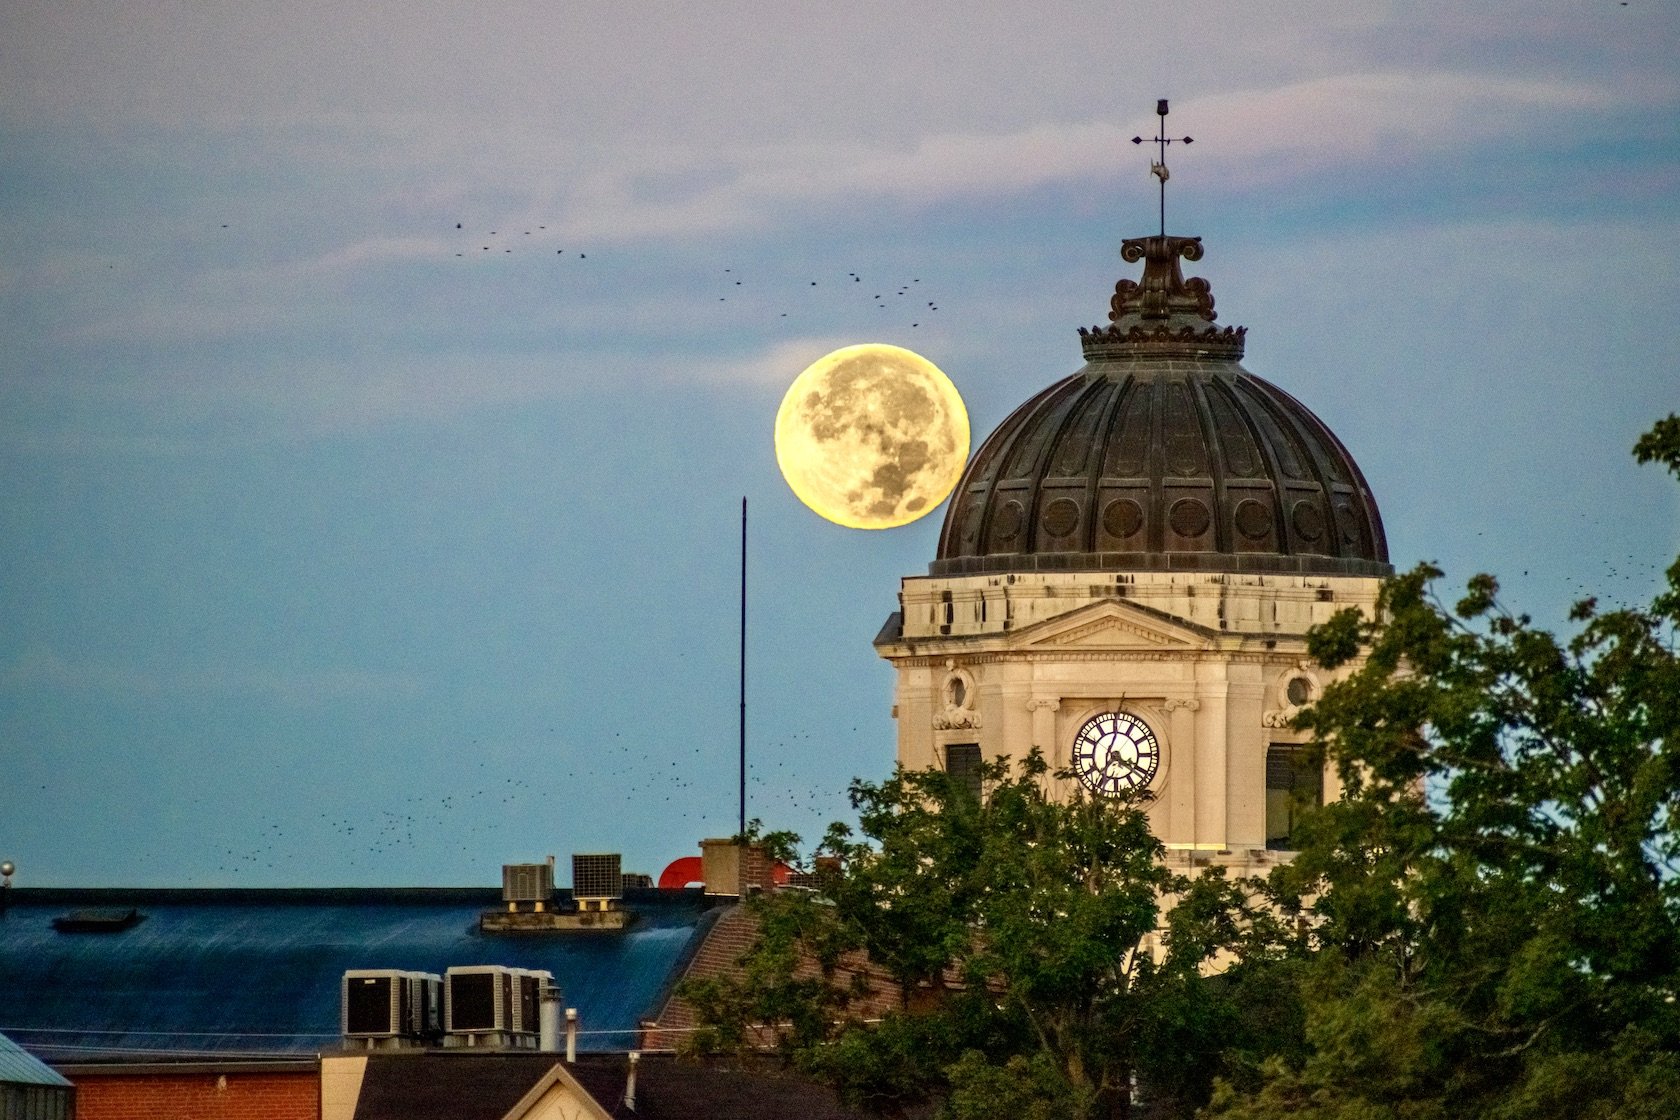 Moonset at the courthouse